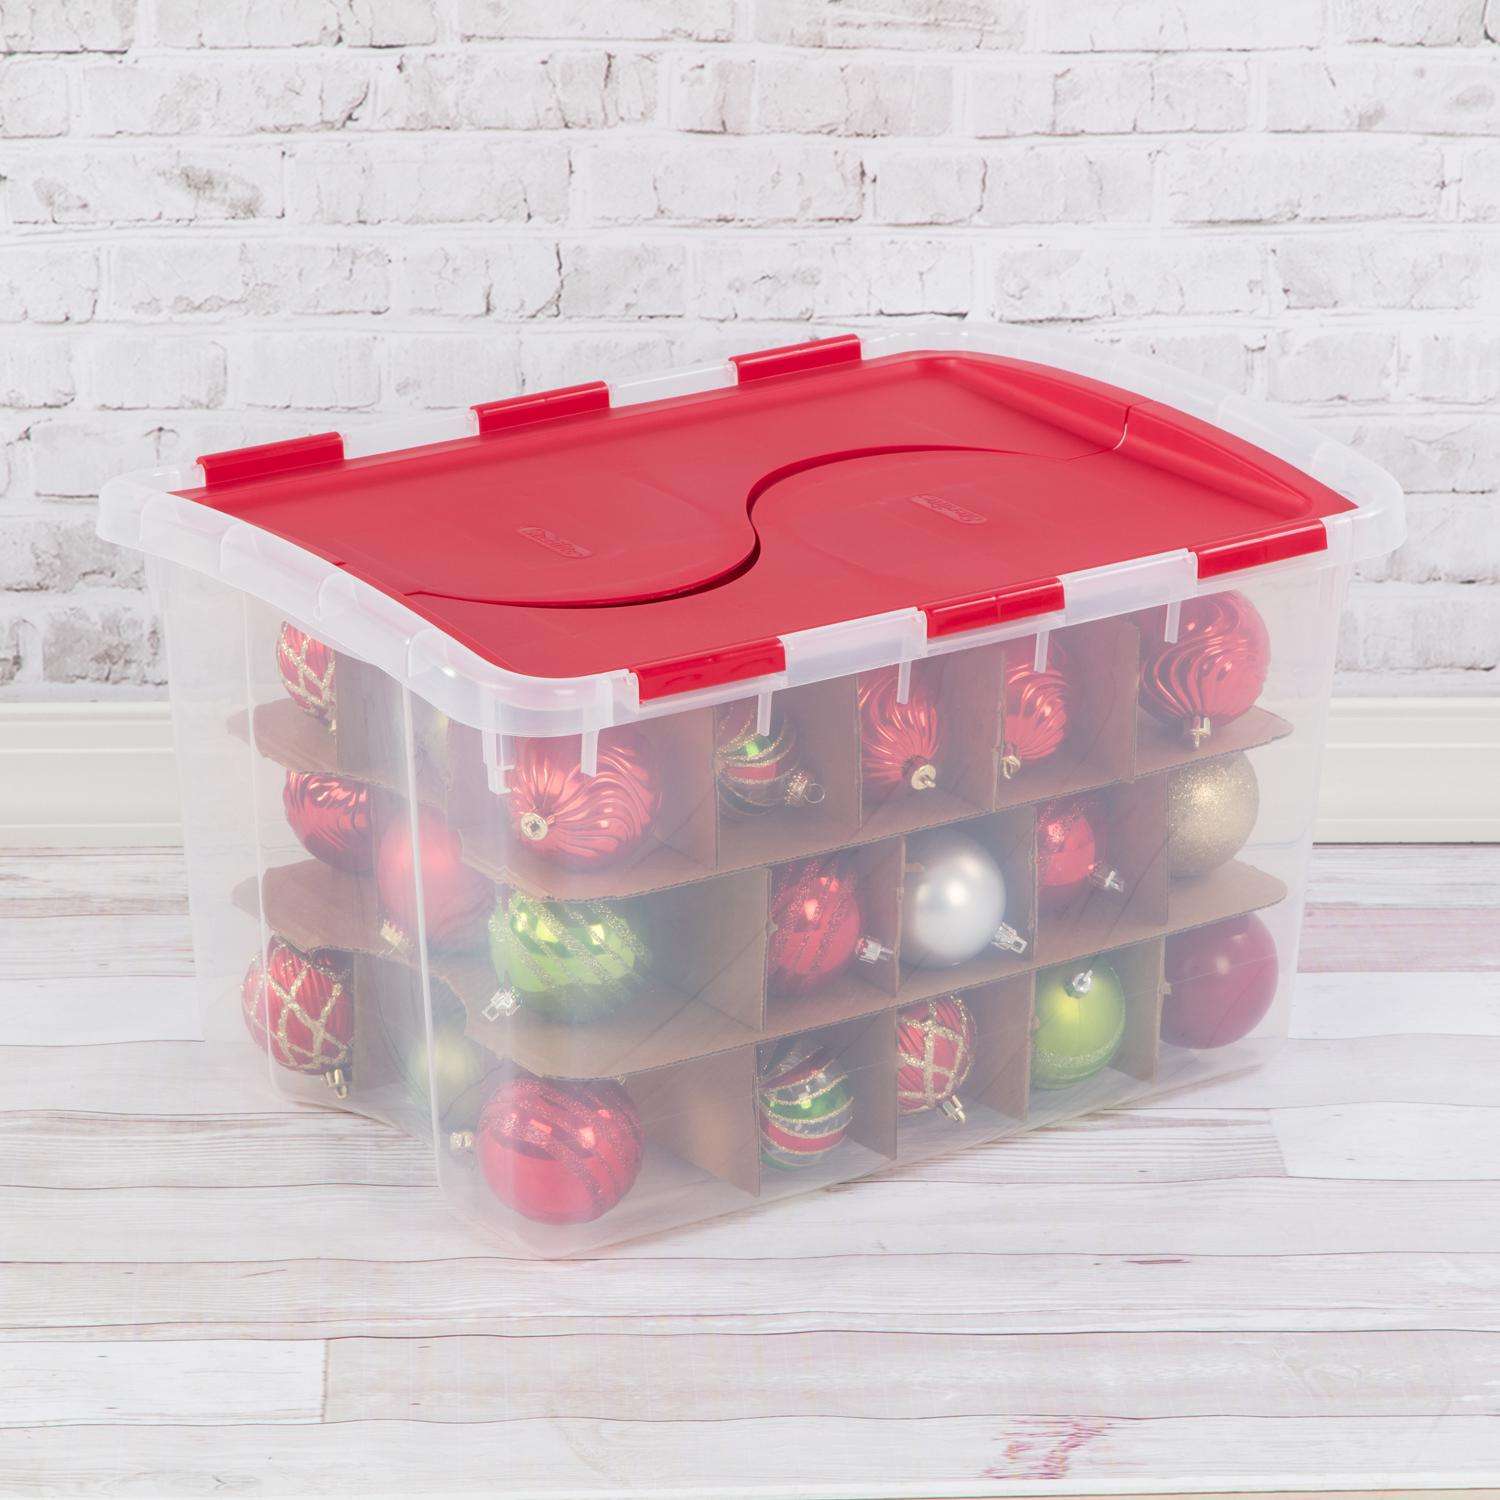 Clear Rigid Plastic Hinged Boxes - Stock